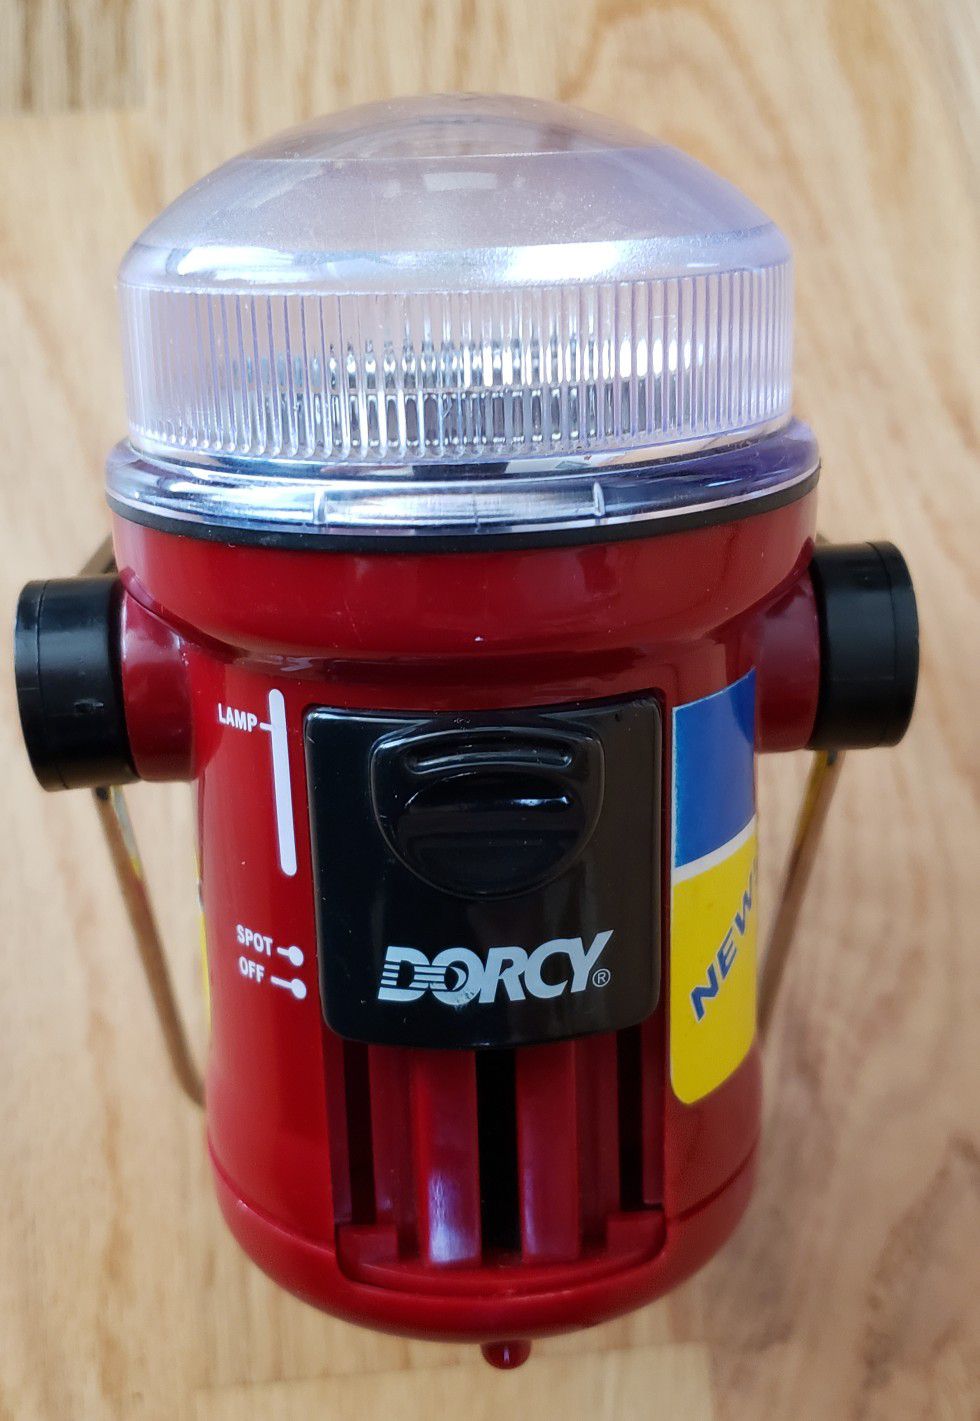 Dorcy- Portable, Focusing Area Lamp with Multi-Purpose Handle (requires 4 AA batteries)